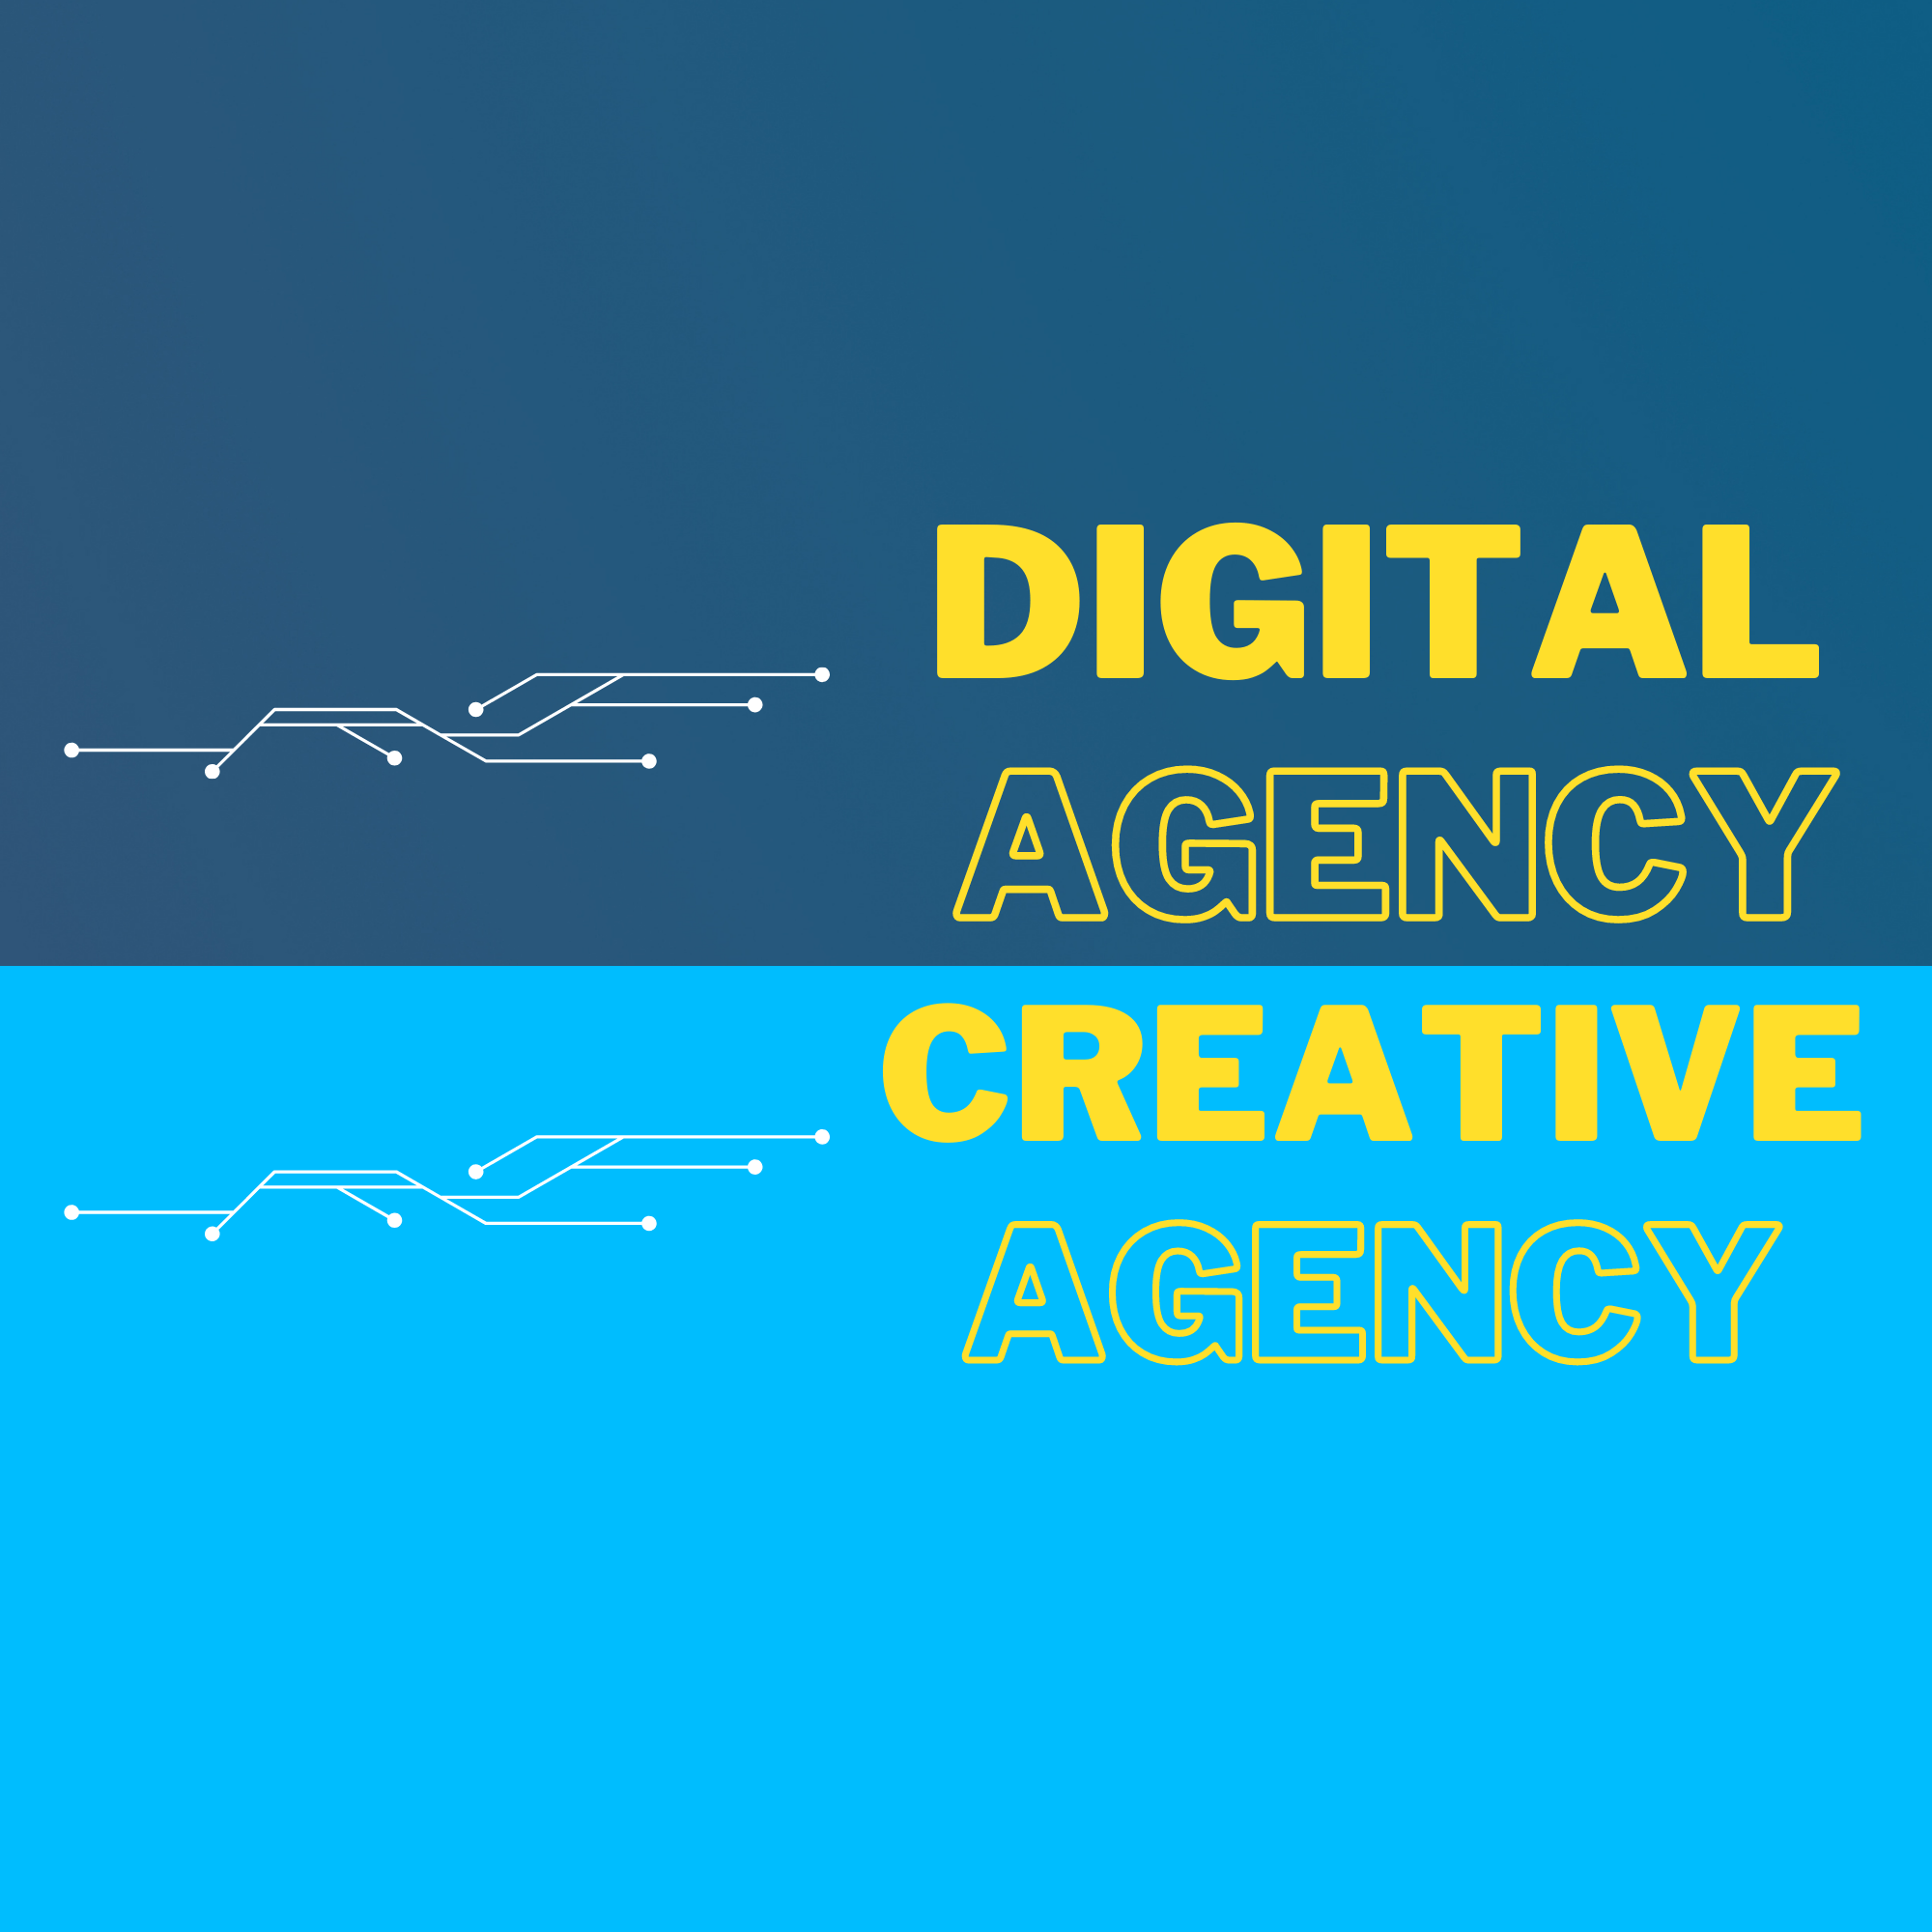 Digital Agency vs Creative Agency – What Is the Difference?